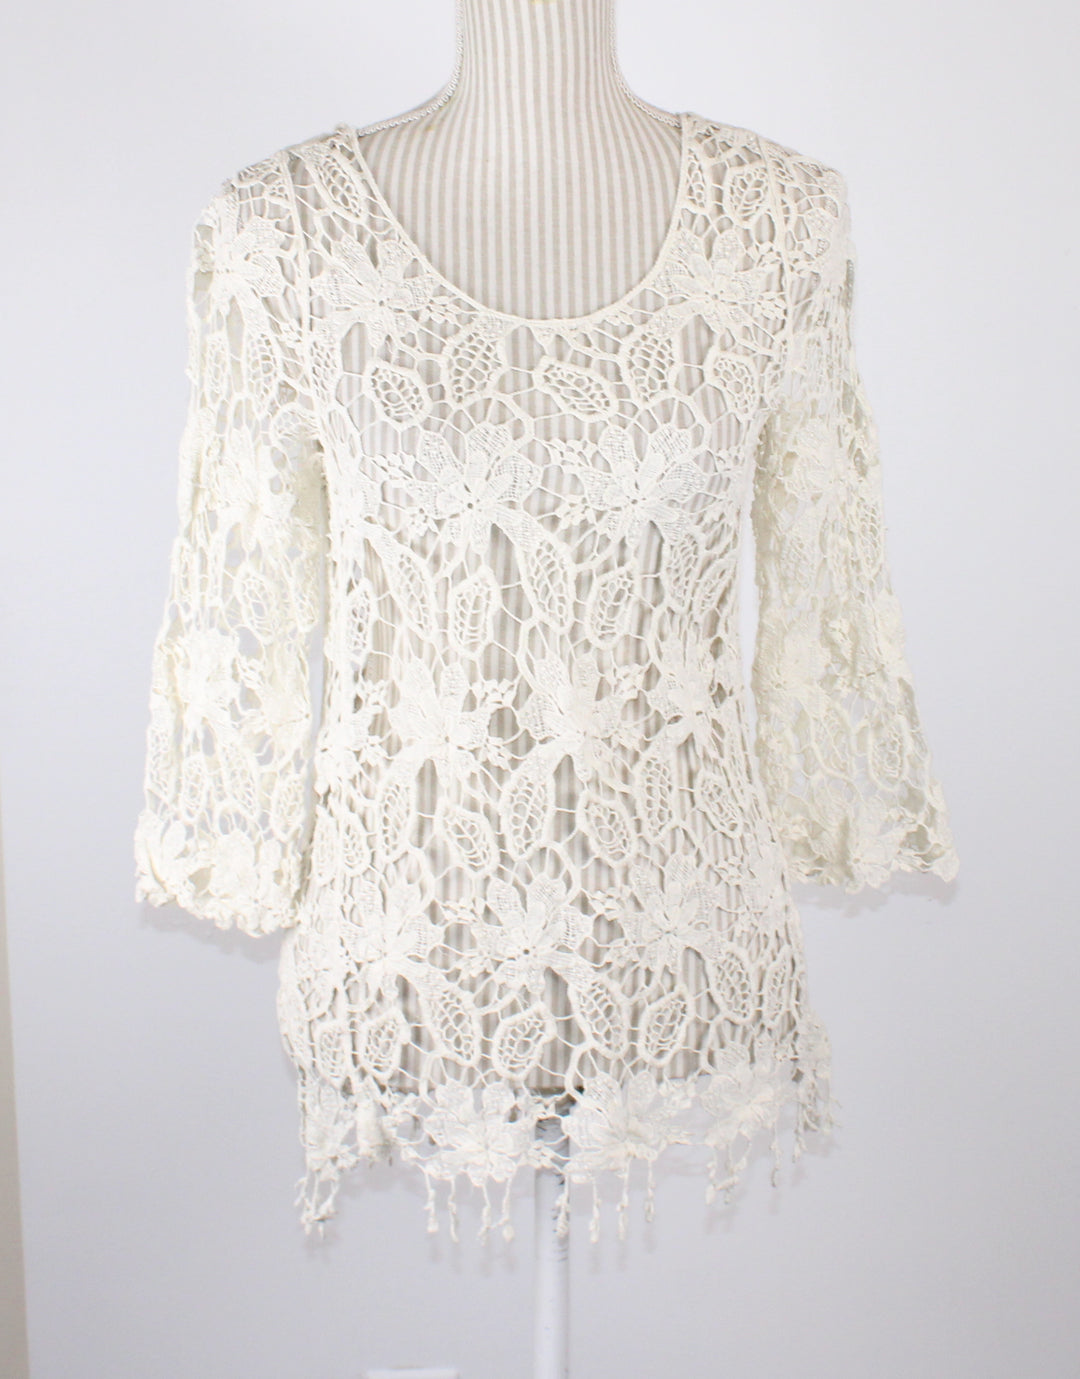 IVORY LAVE TOP LADIES APPROX SMALL EUC